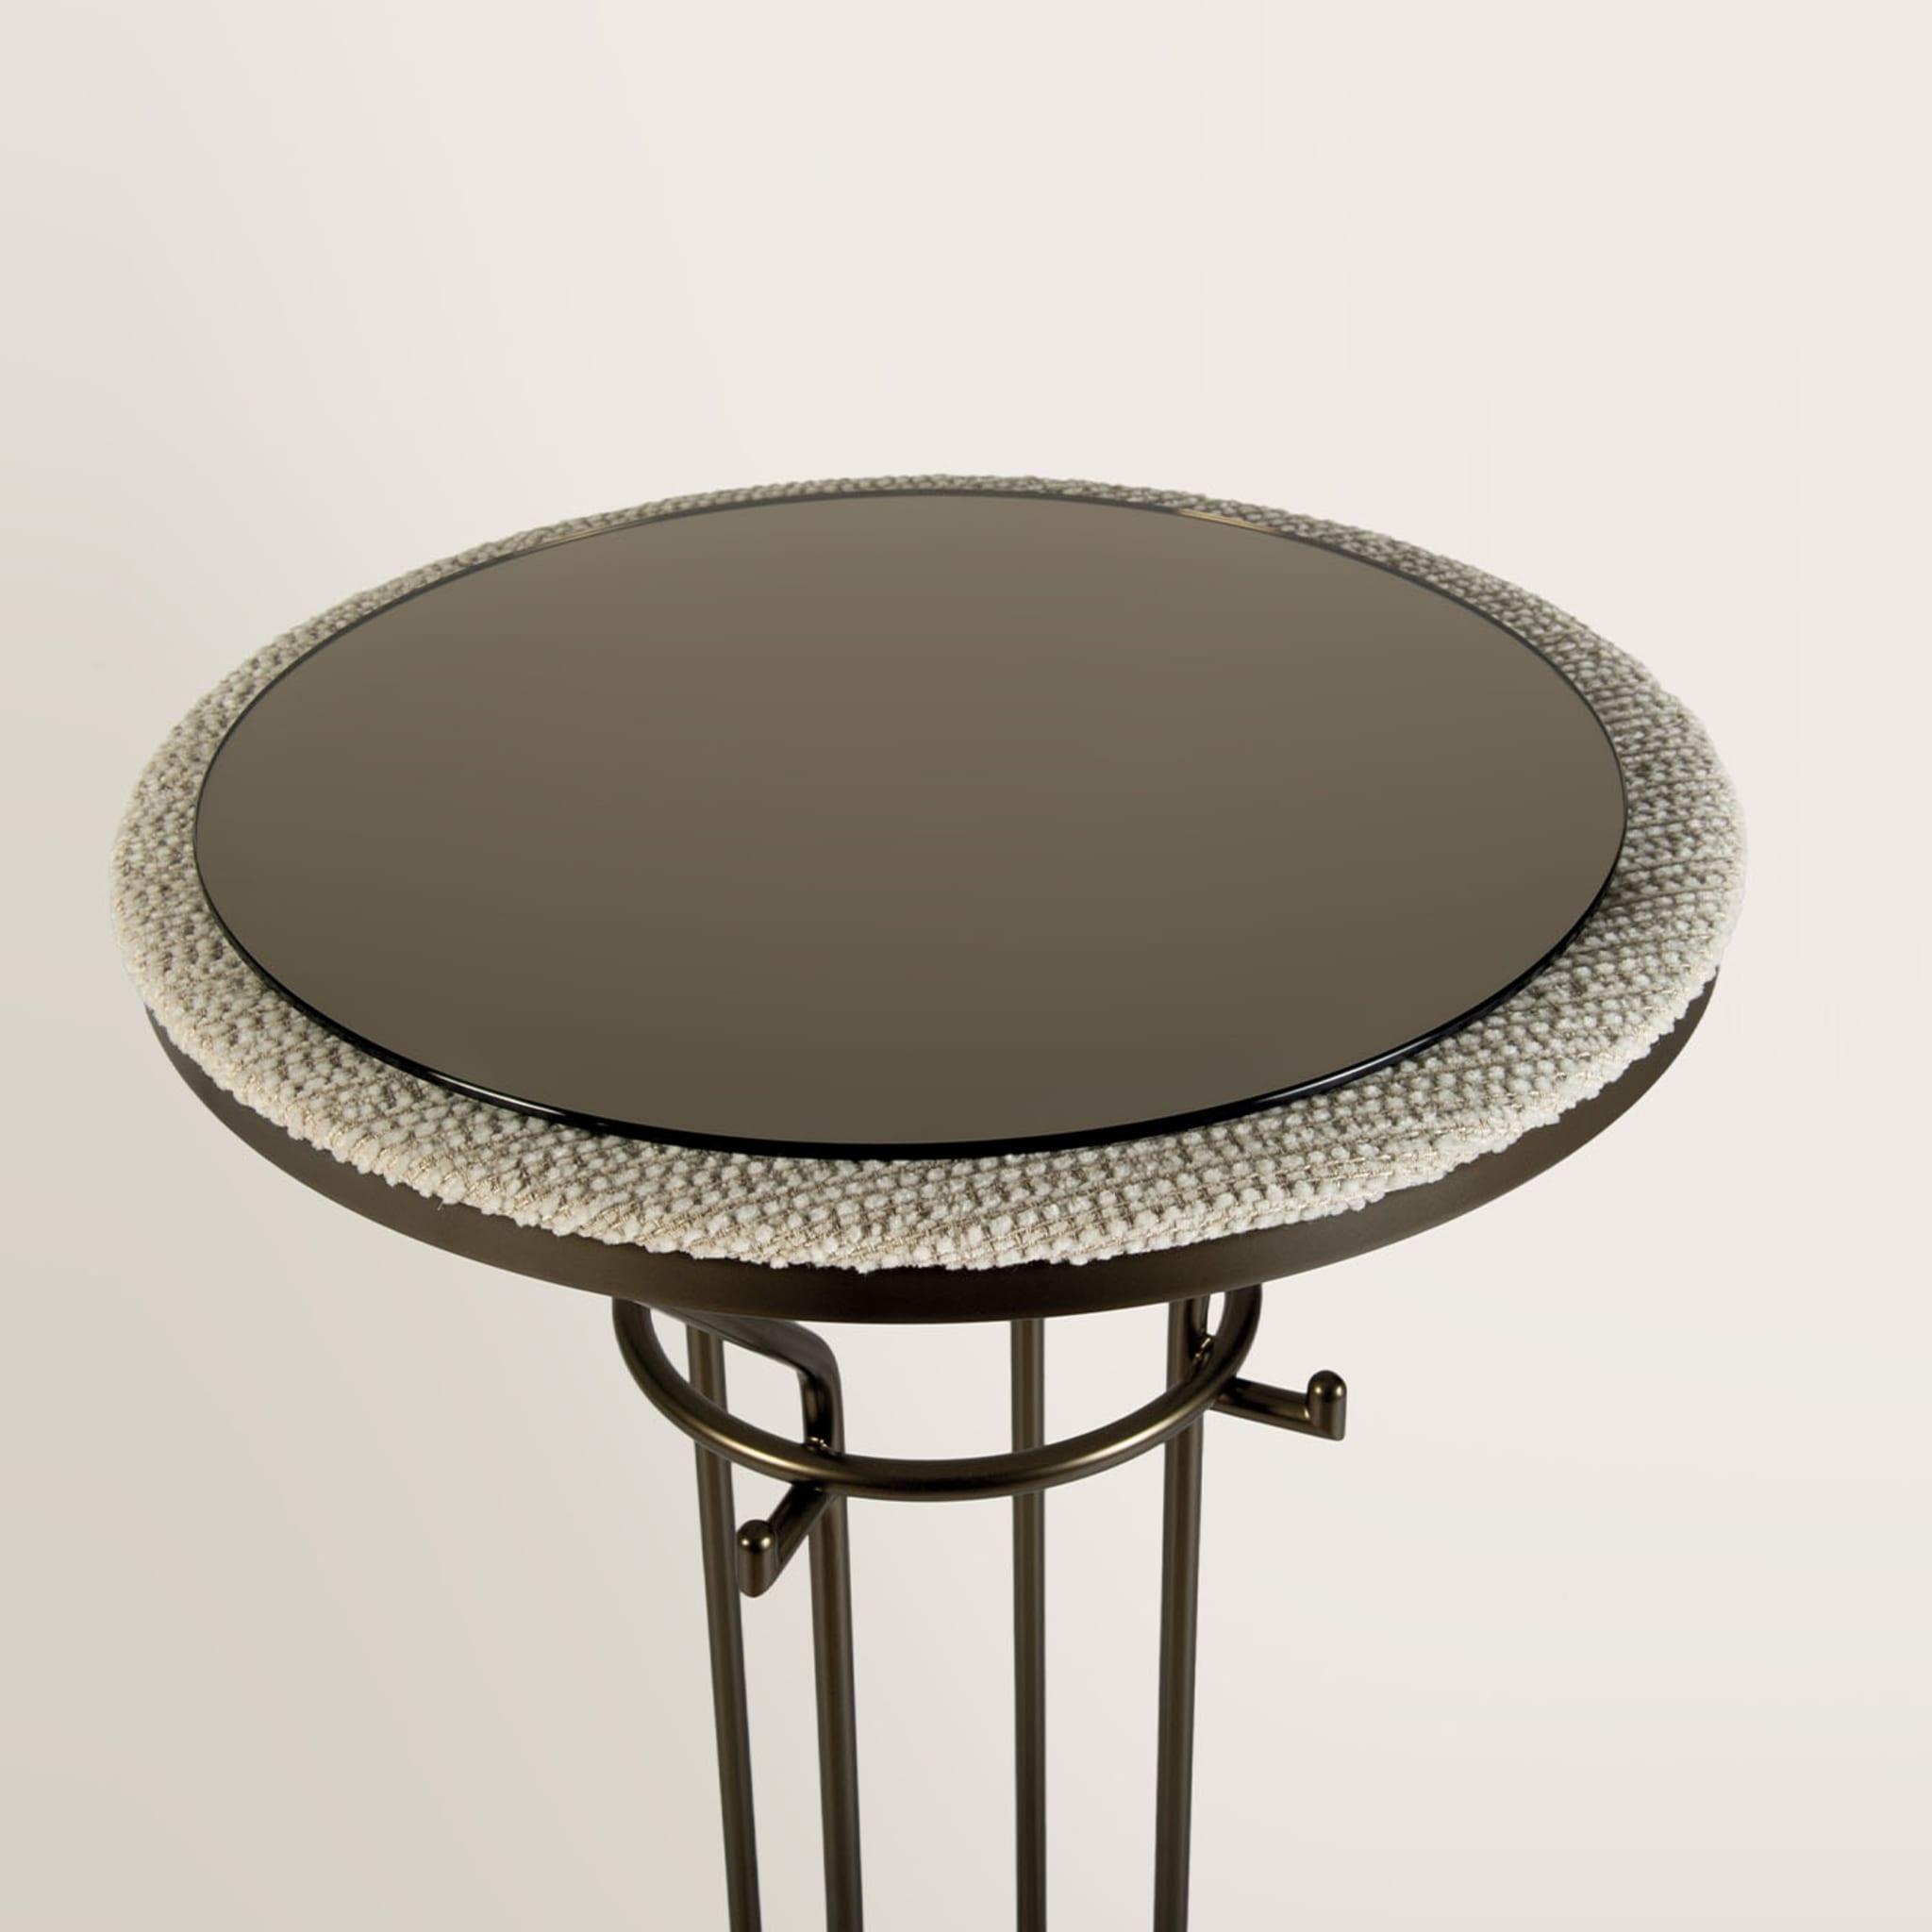 Back to Bronze High Bistro Table - Alternative view 1